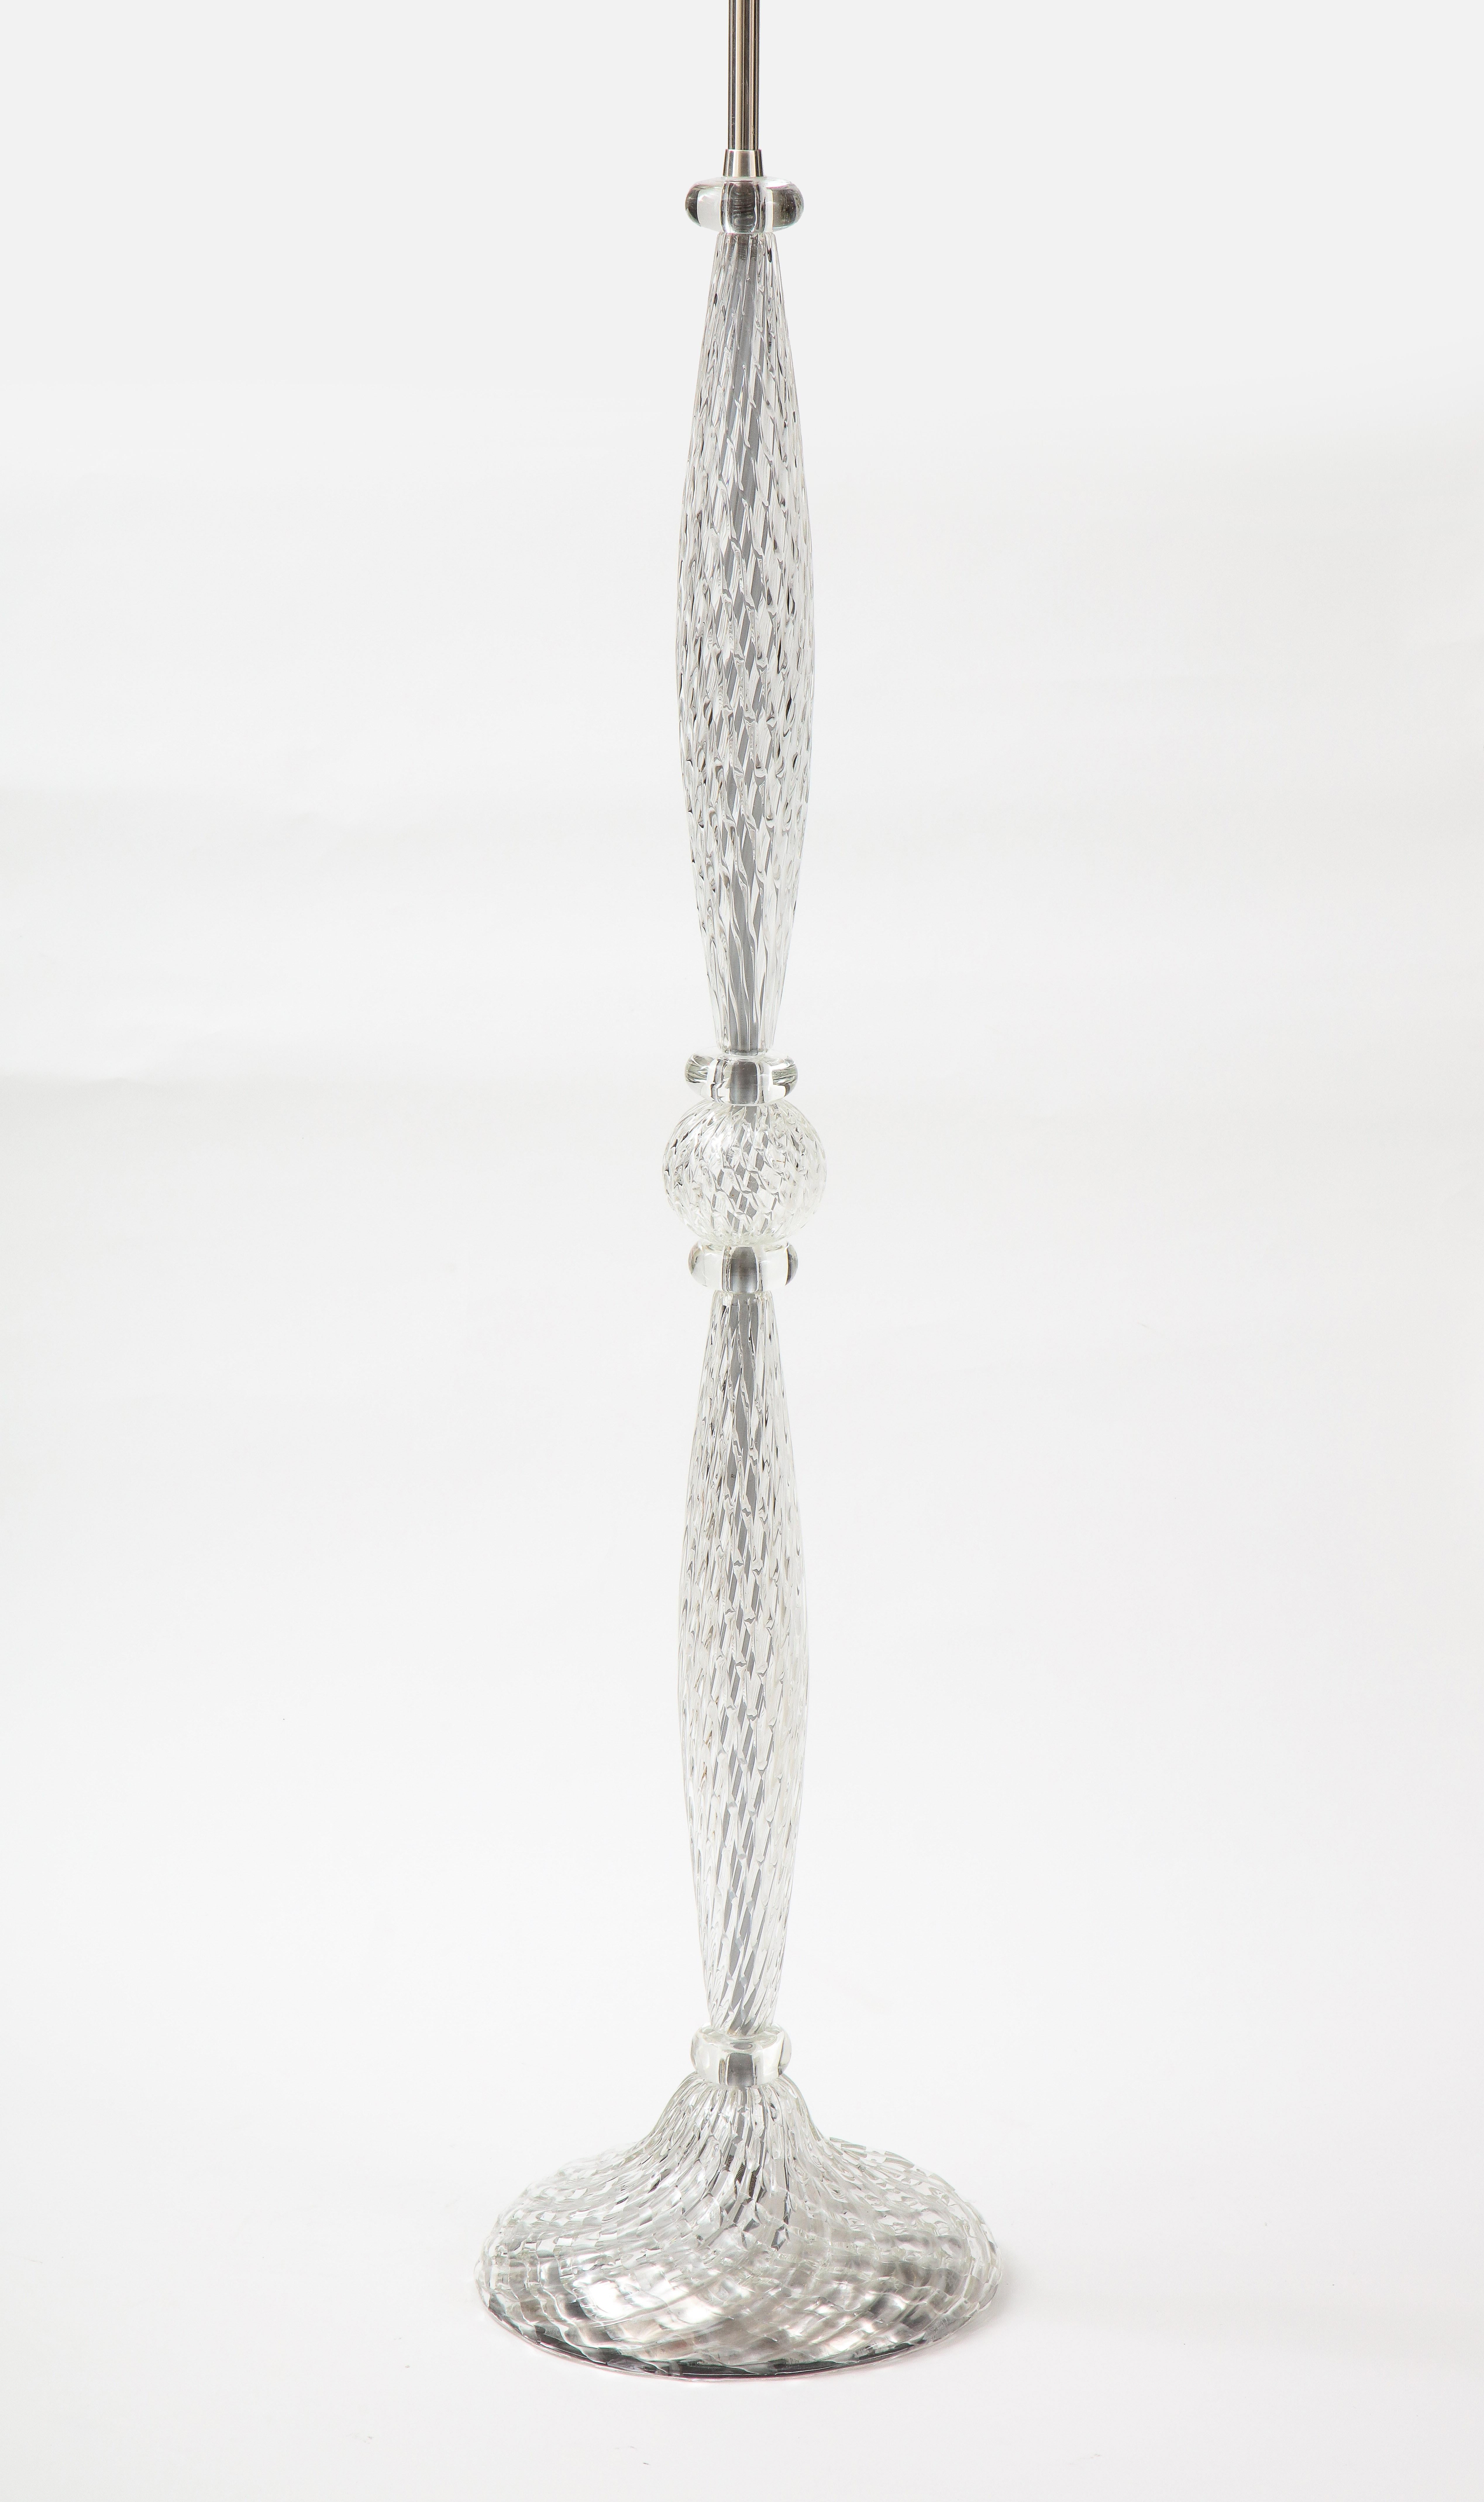 1950's diamond pattern murano glass floor lamp by Archimede Seguso.
The lamp has been newly rewired with a polished Nickel adjustable double cluster.